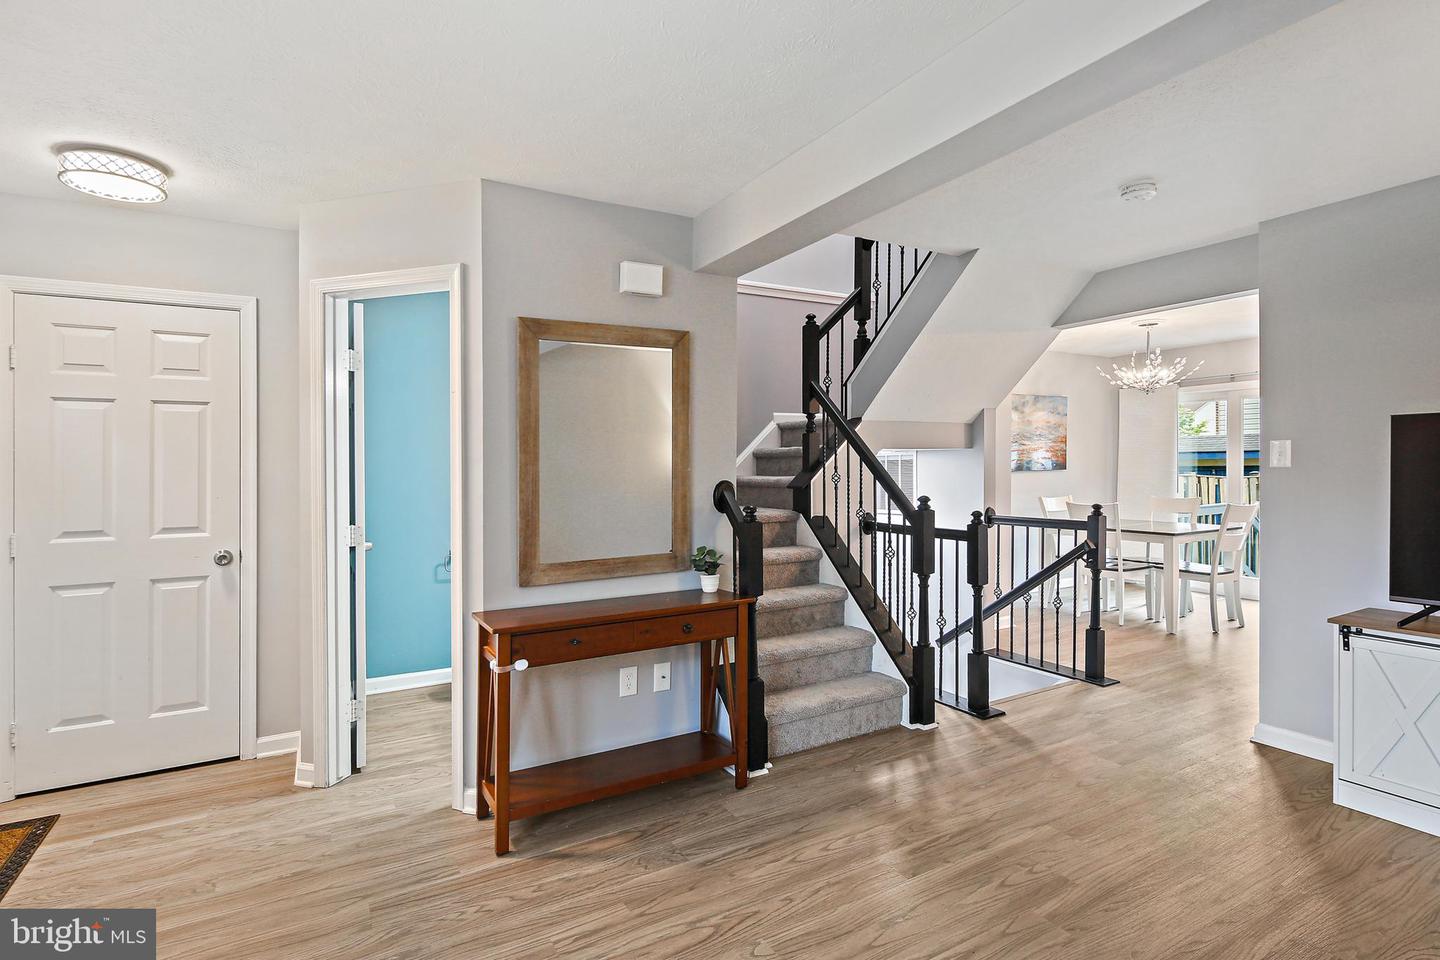 Photo 5 of 32 of 5433 Canonbury townhome